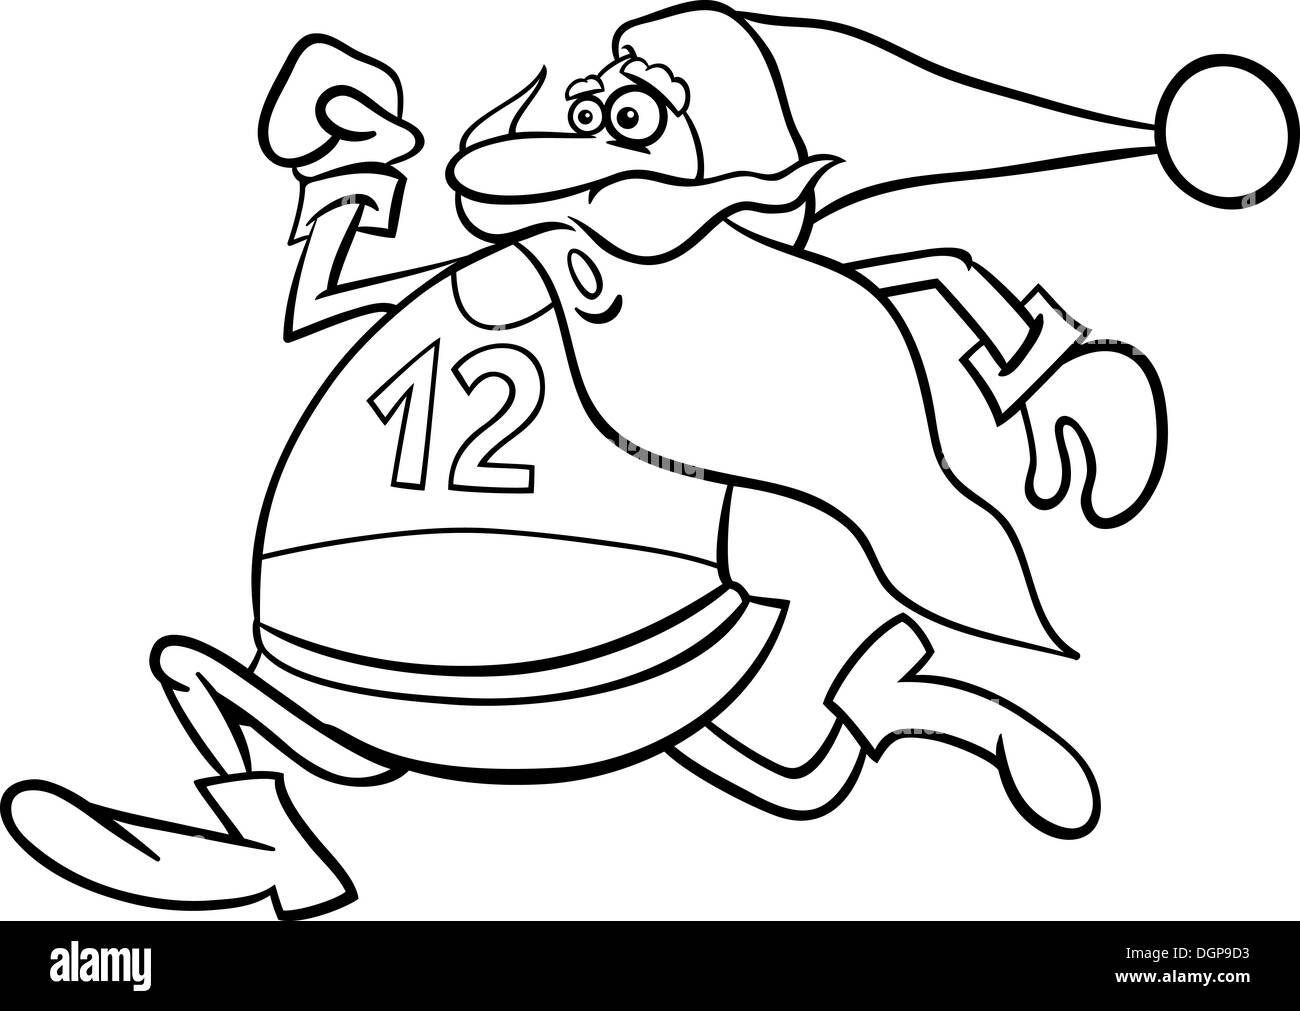 Black and White Cartoon Illustration of Funny Running Santa Claus Character for Coloring Book Stock Photo